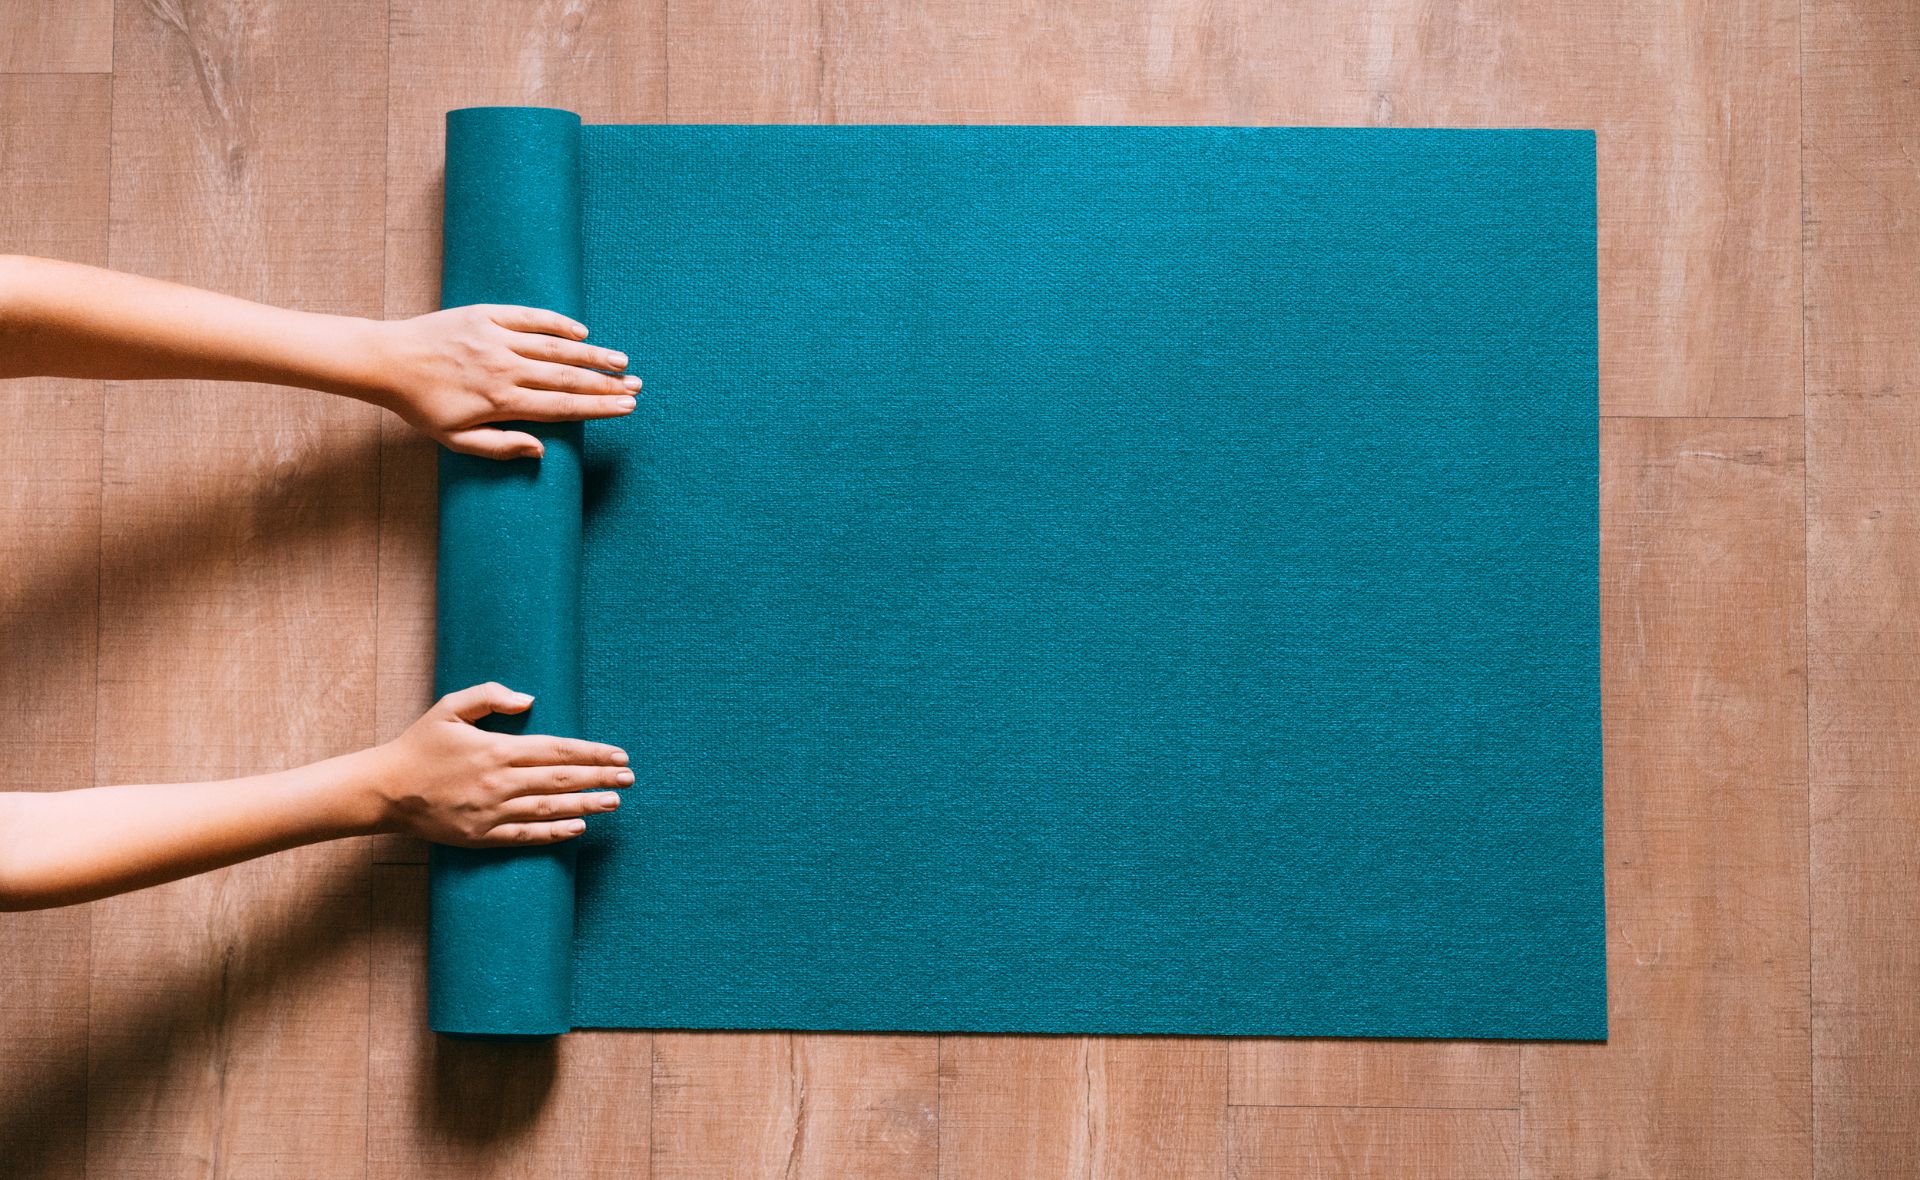 Pilates perfection: The best Pilates mats that will make you the envy of class